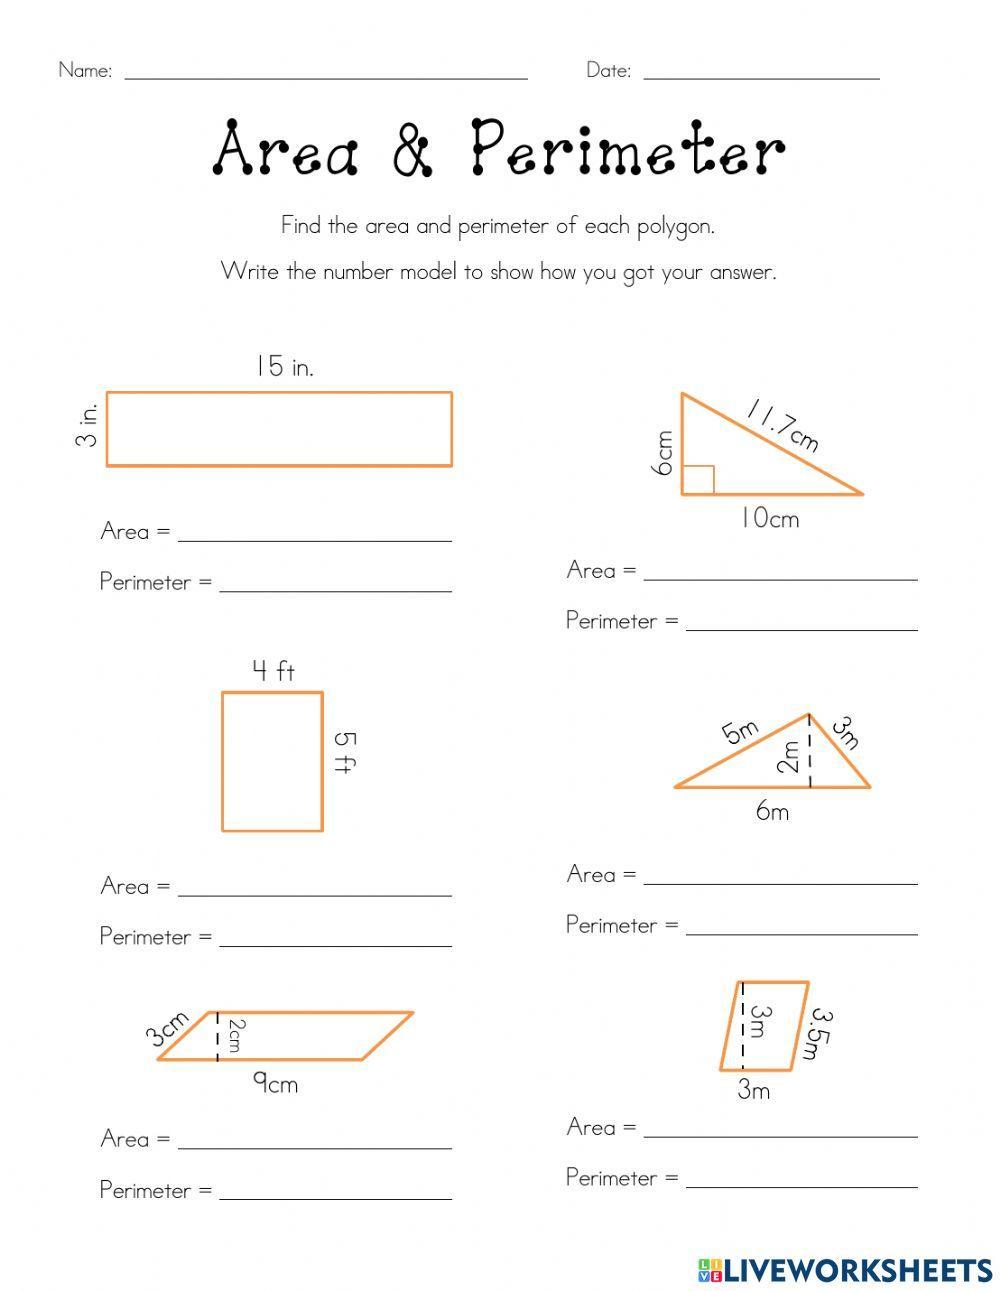 Area and Perimeter of 2D shapes